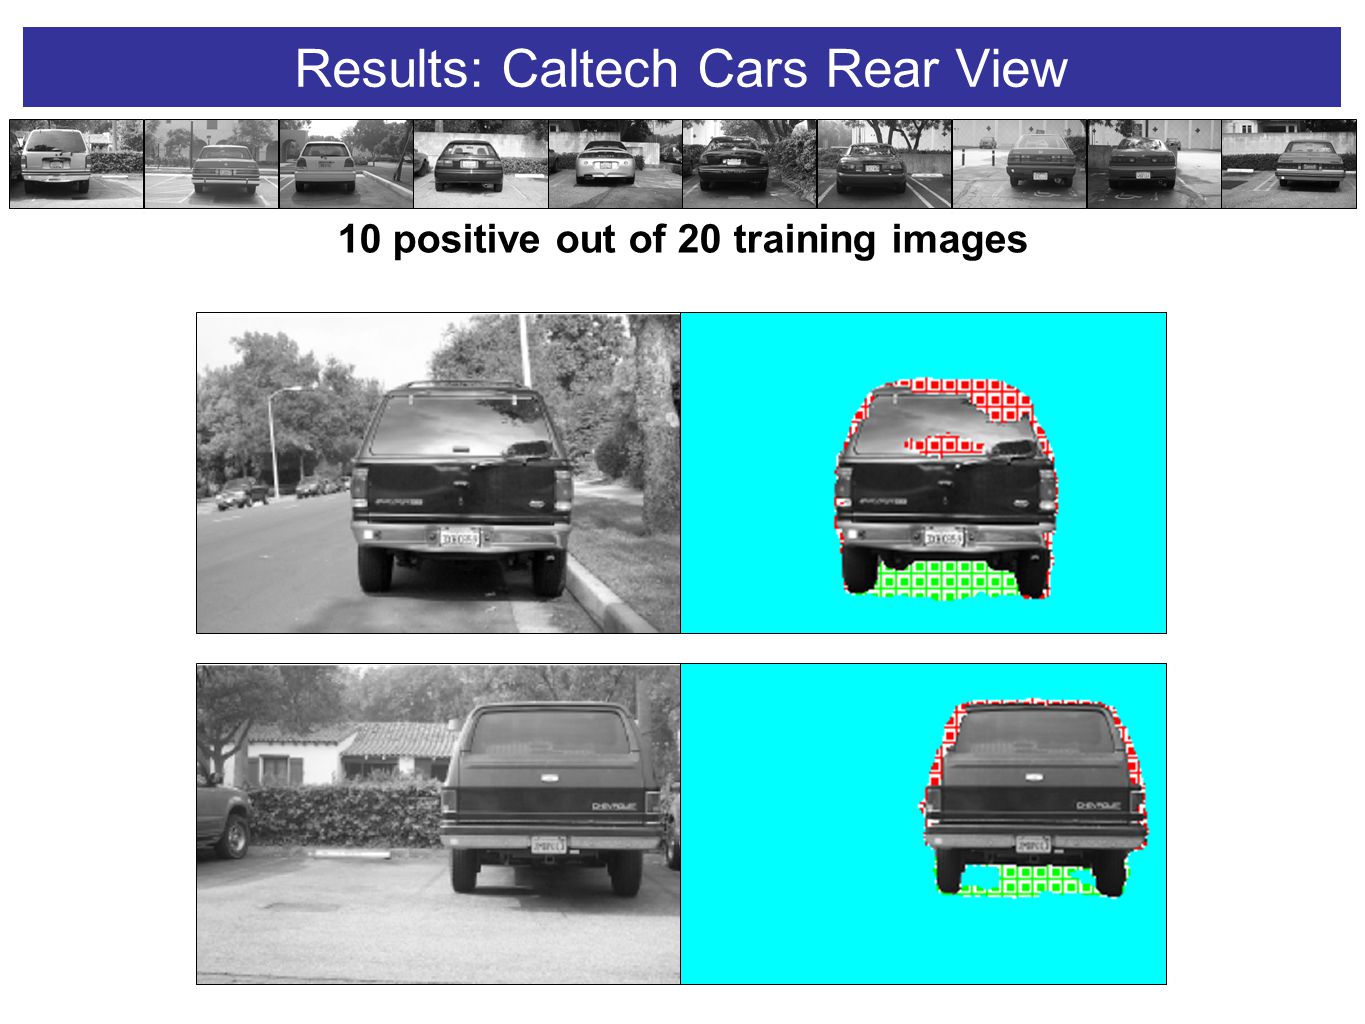 Results: Caltech Cars Rear View 10 positive out of 20 training images